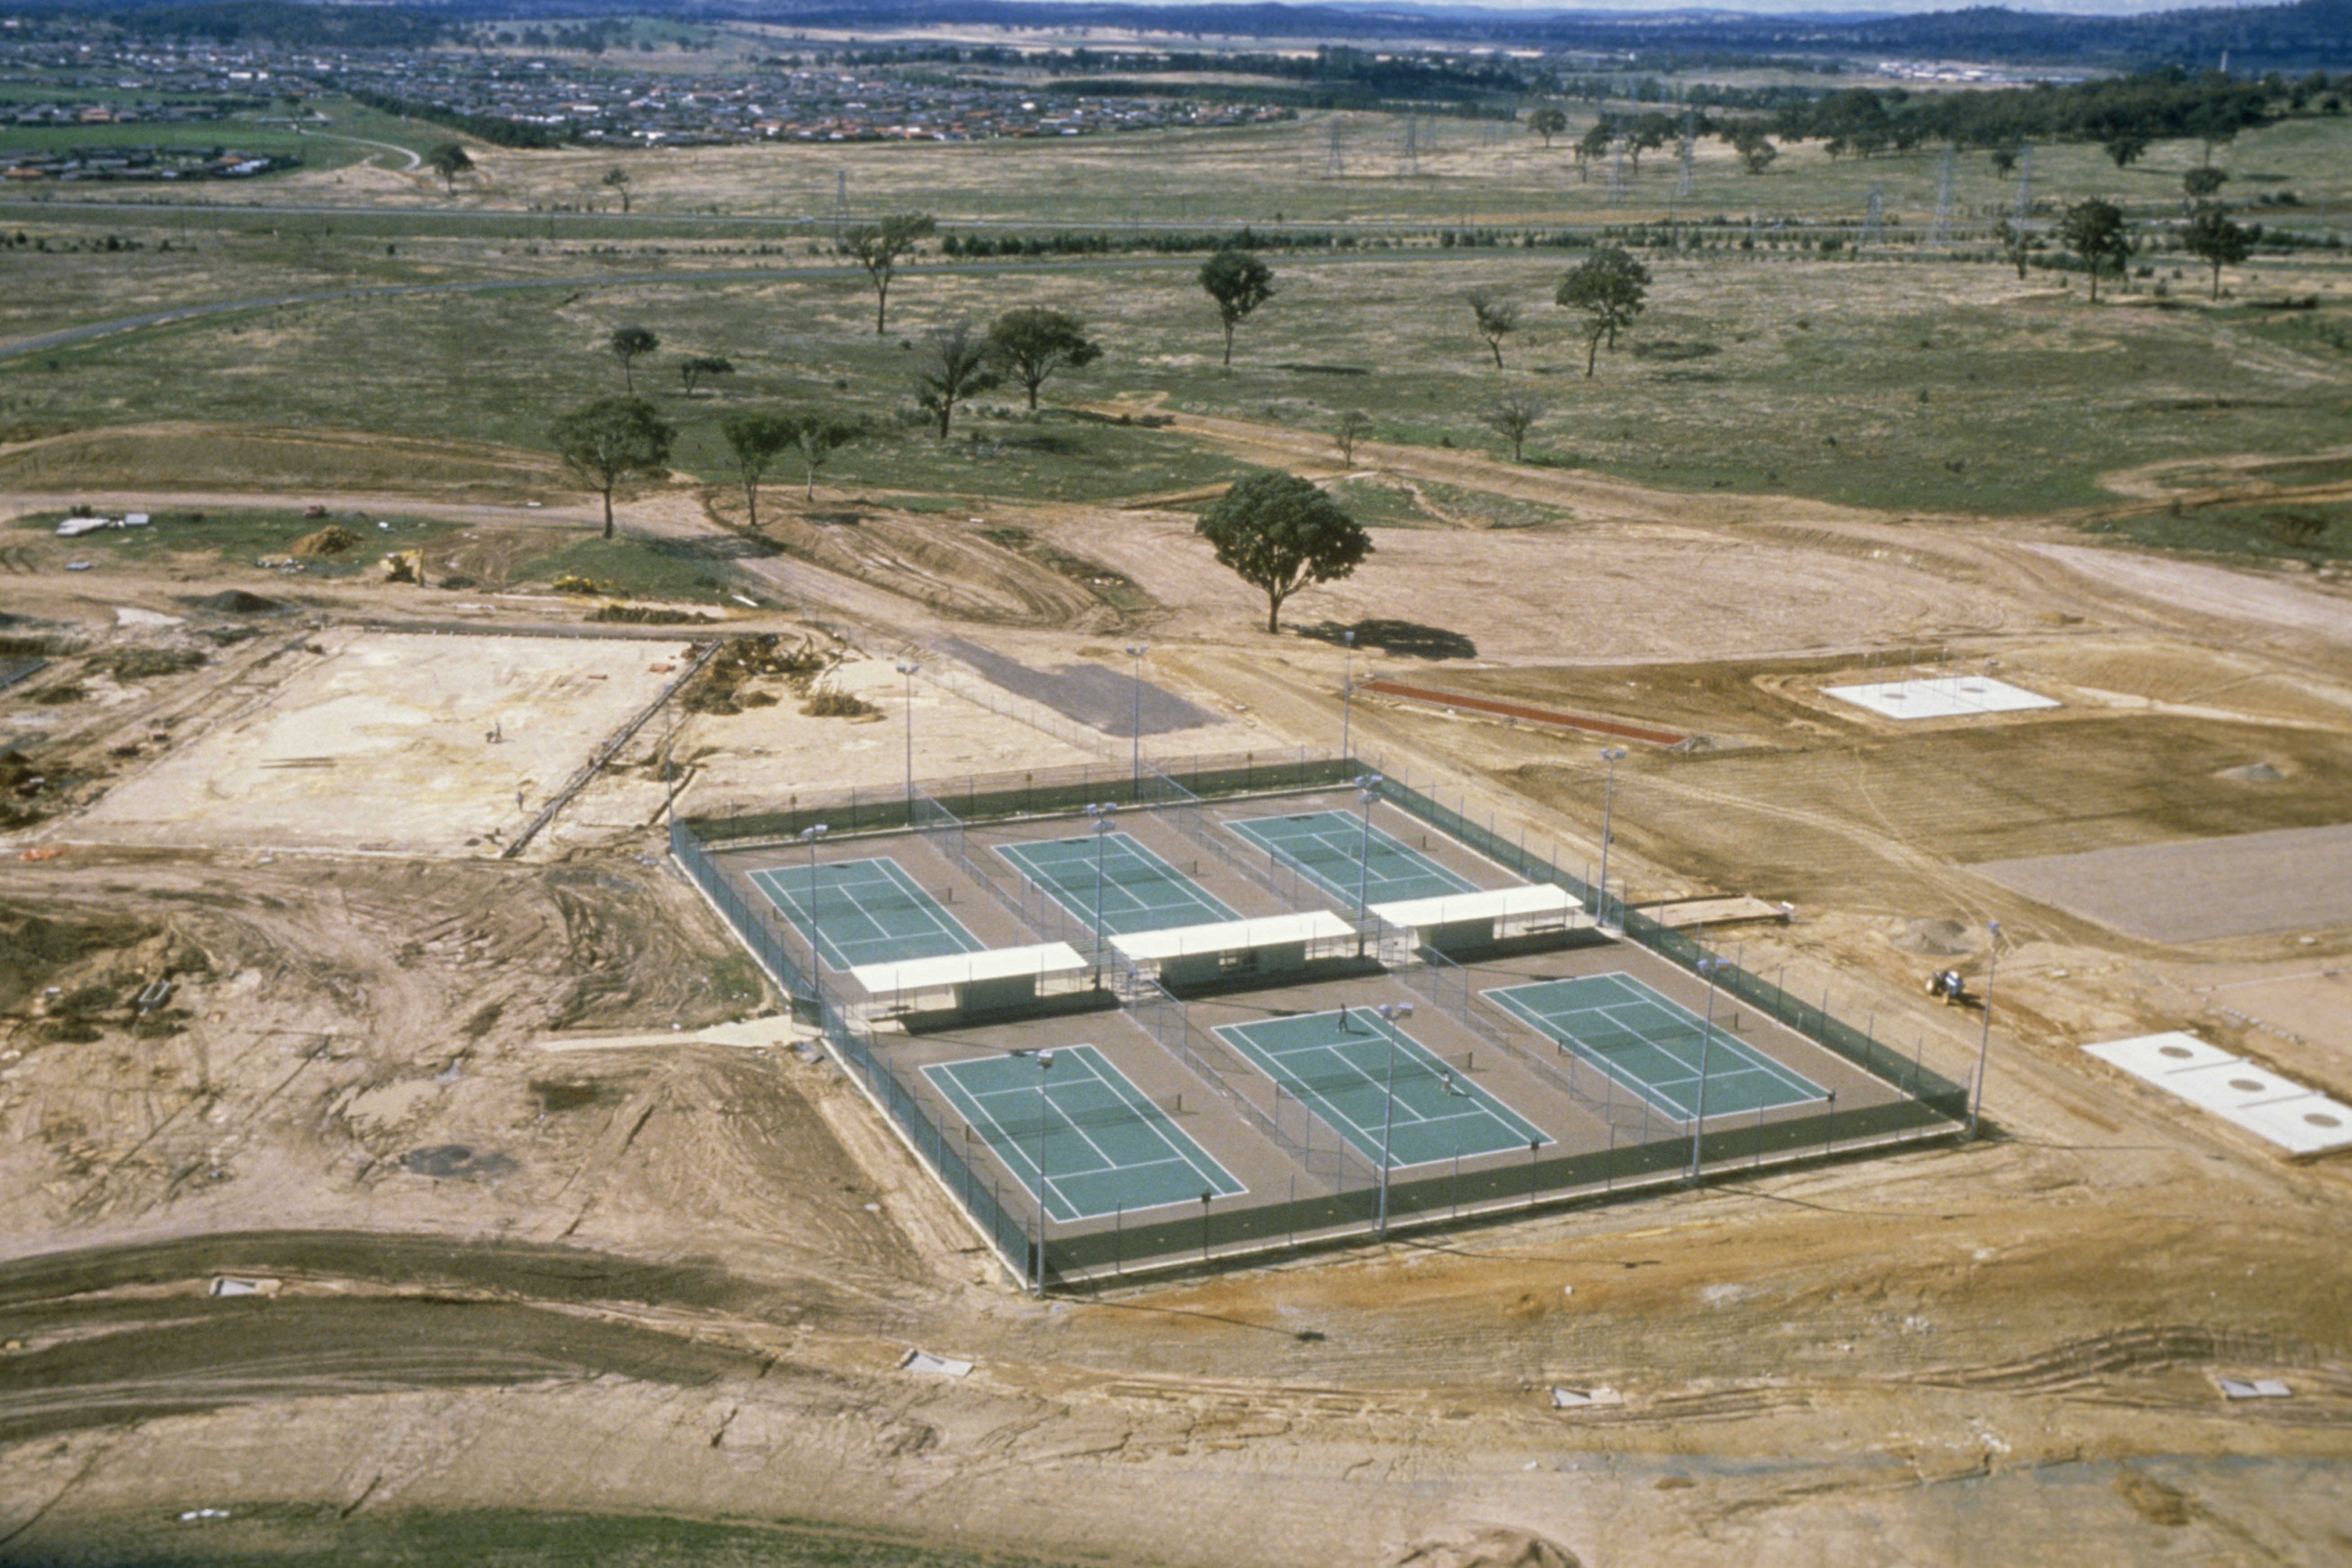 The old AIS outdoor tennis courts when they were constructed in 1983.